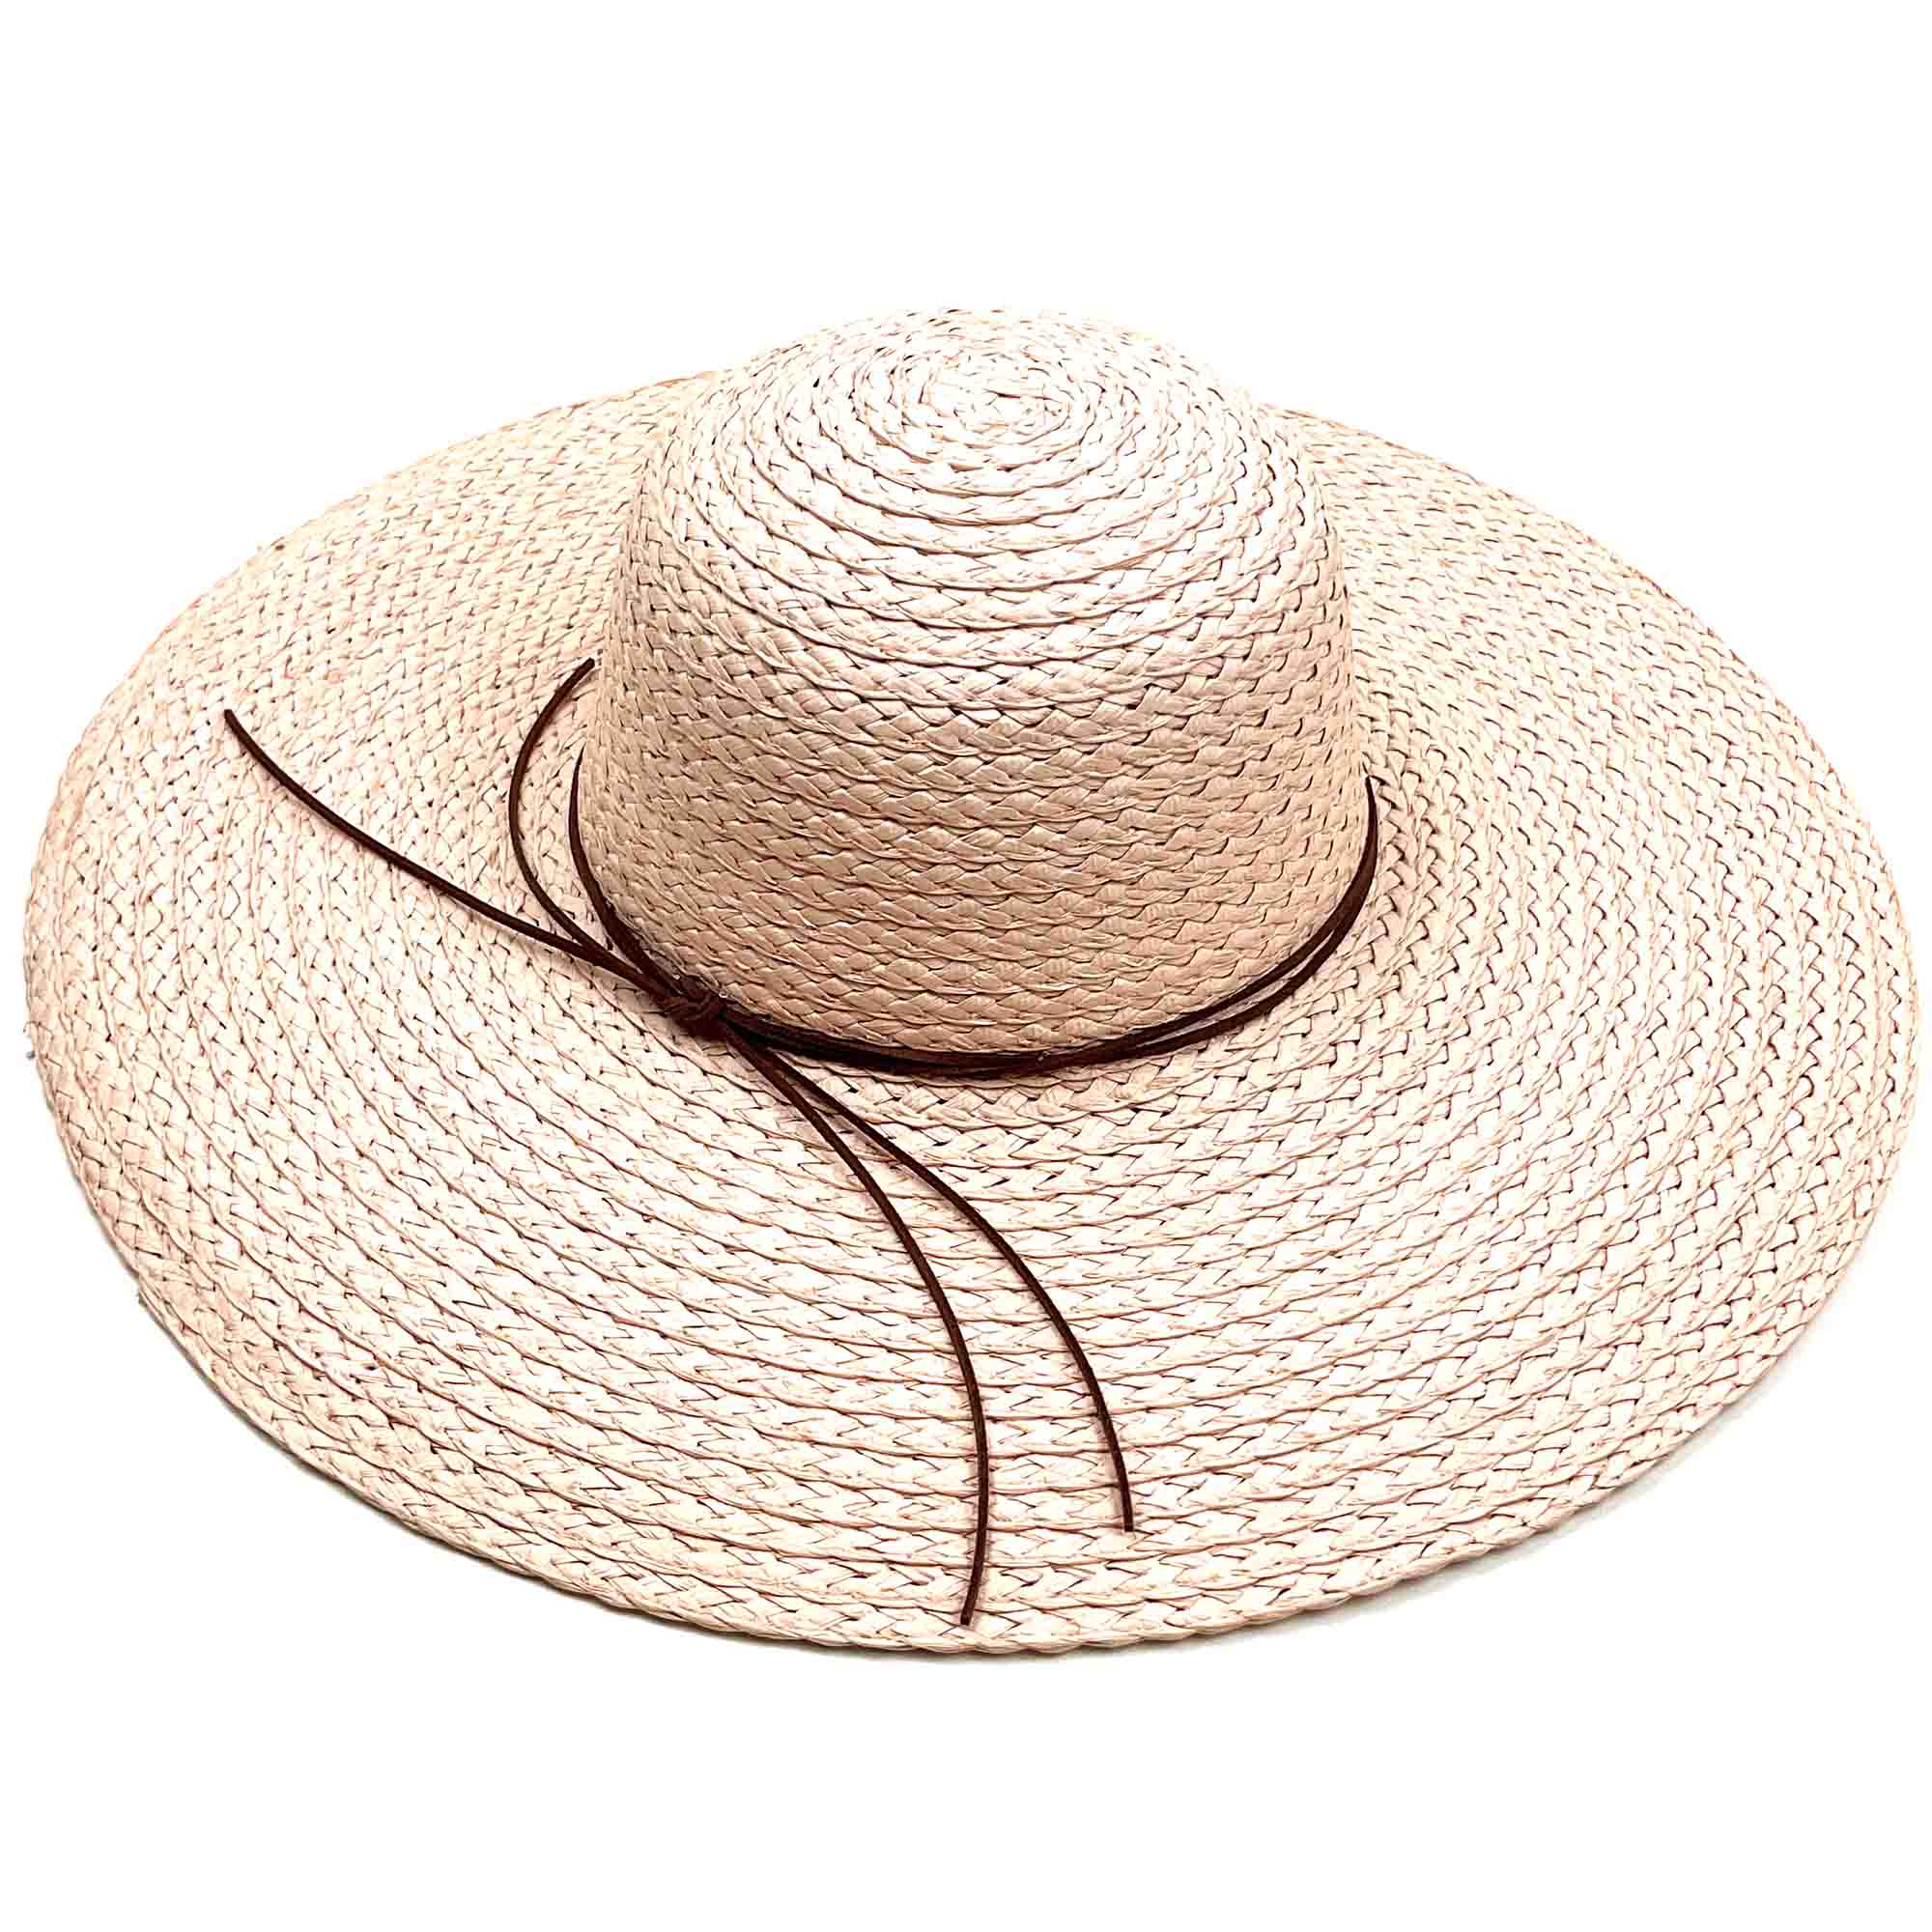 Wide Brim Braided Floppy Beach Hat for Large Heads - Fadivo Hats Pink / Large (58.5 cm)